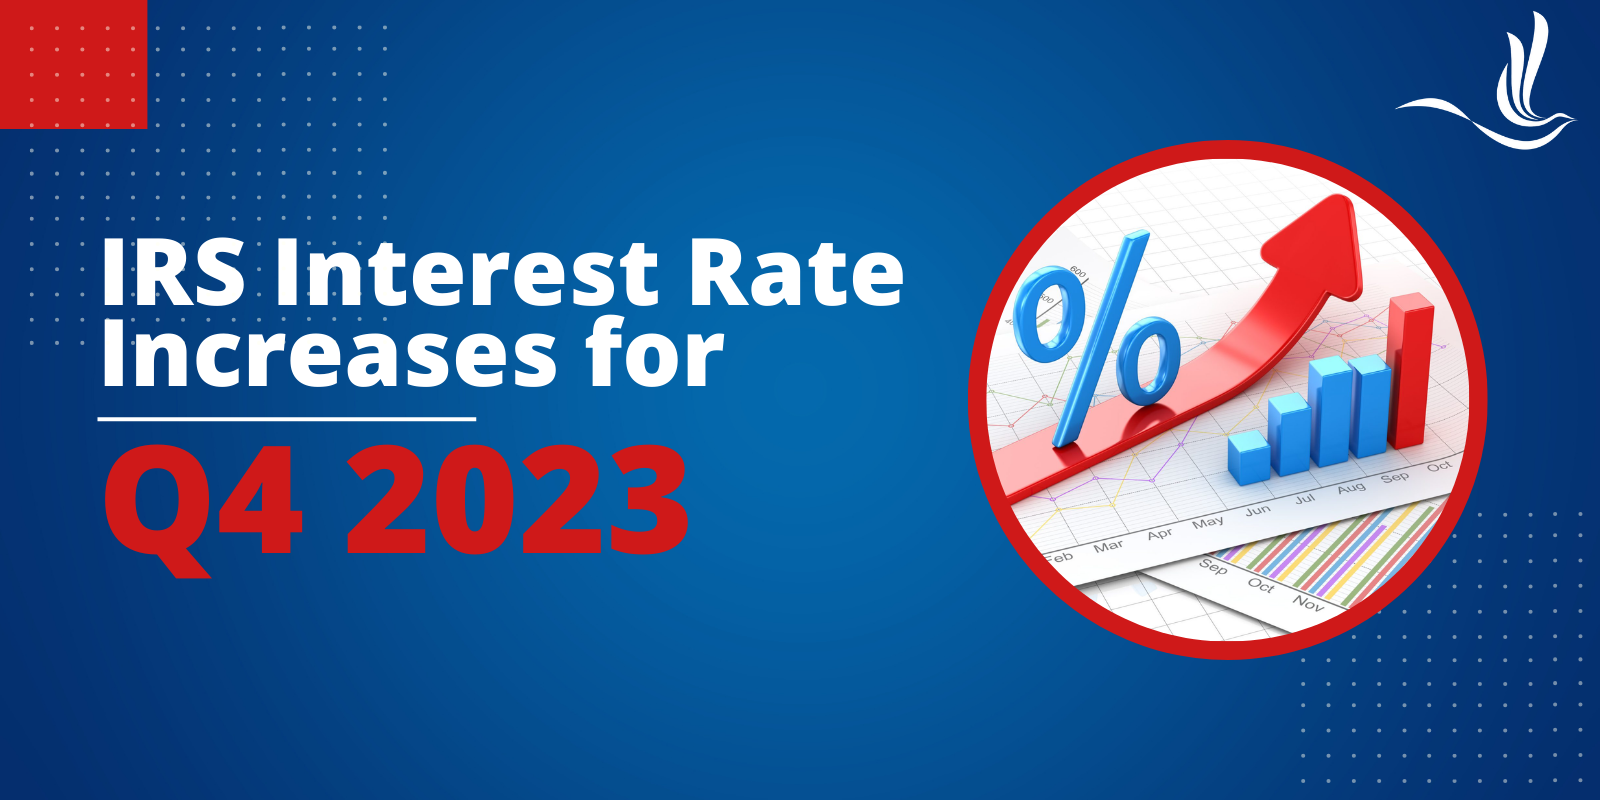 IRS Interest Rate Increases Q4 2023